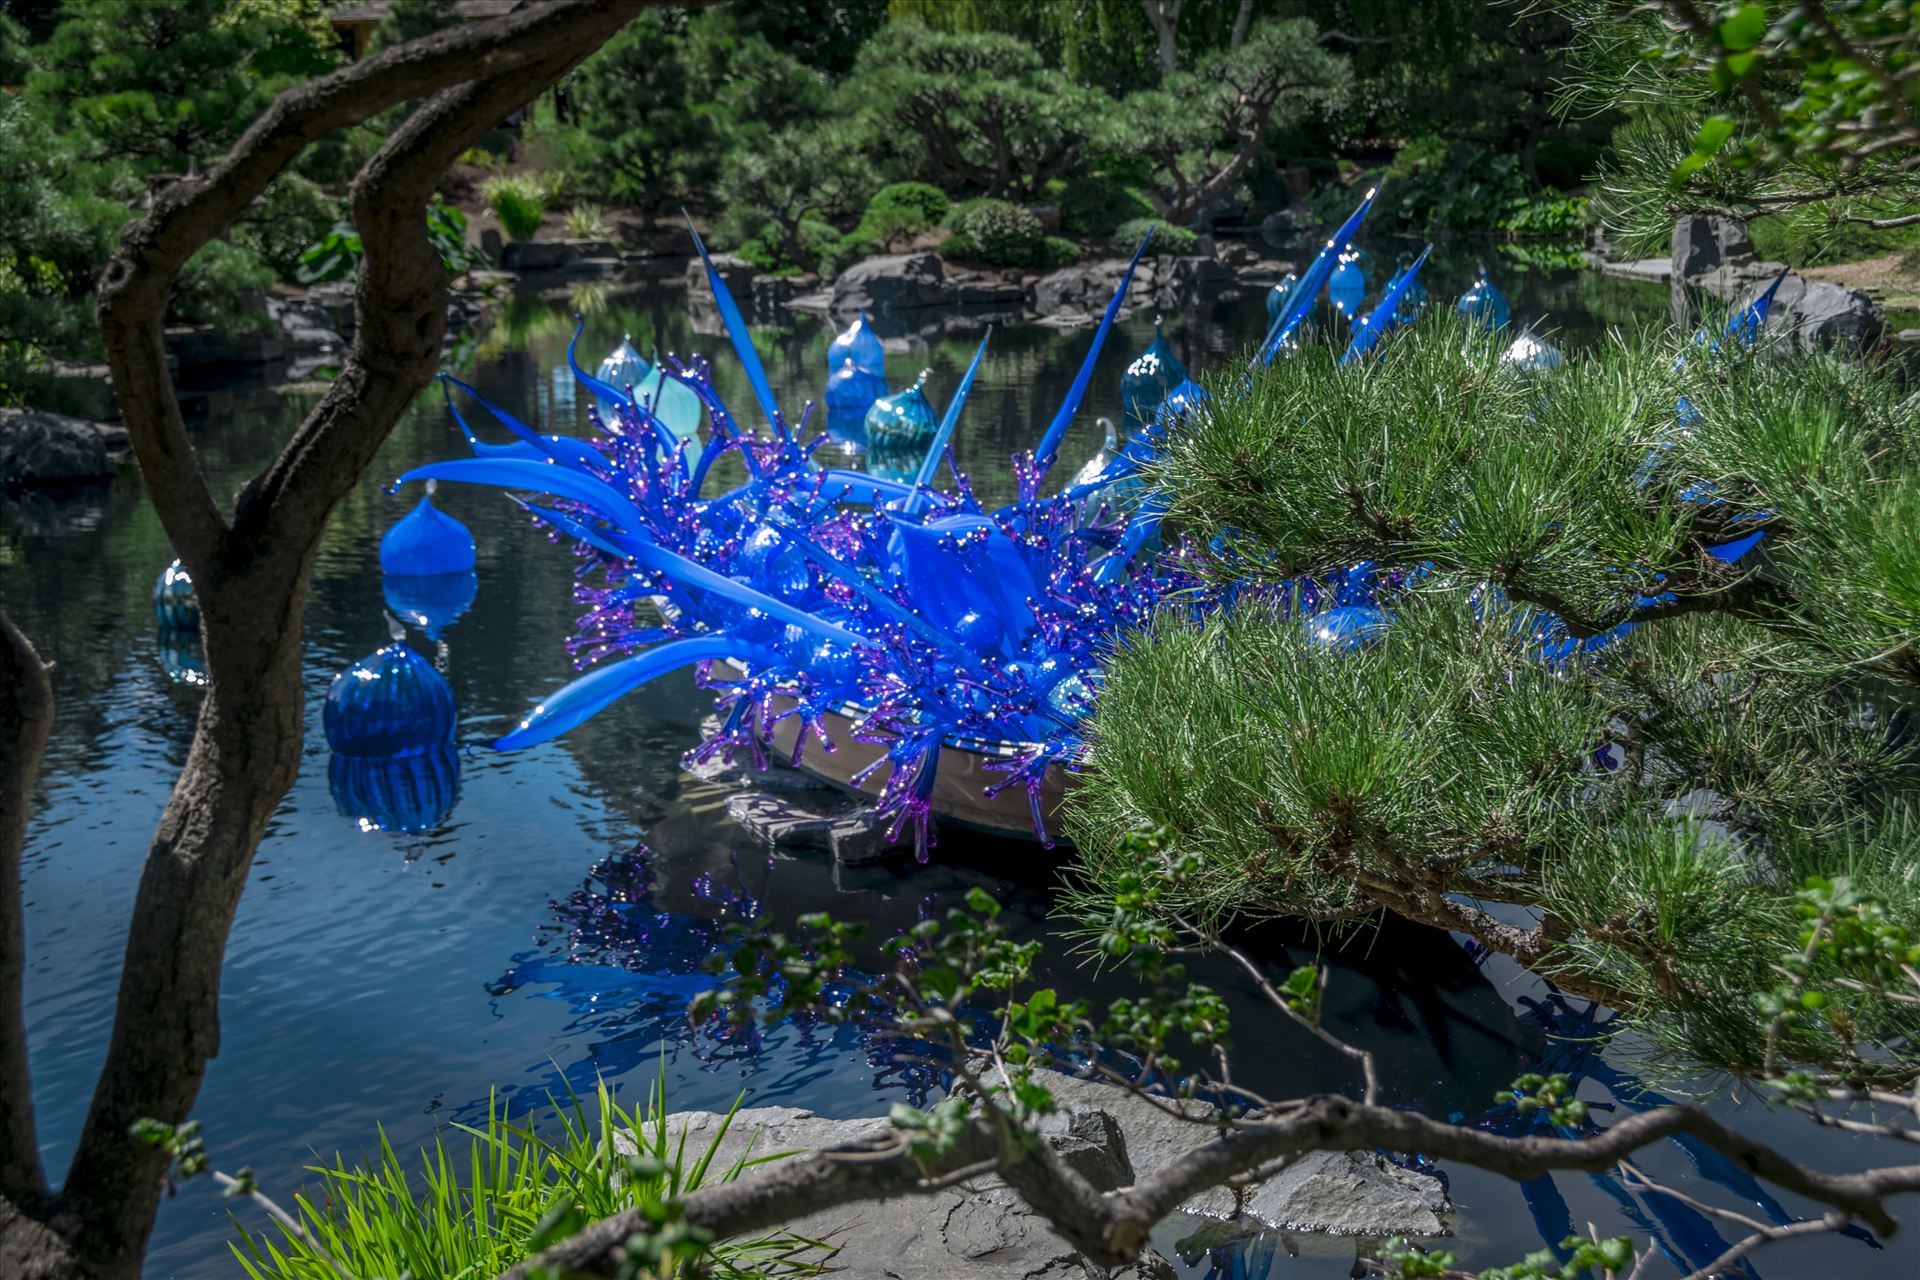 Chihuly Blue Boat 2.jpg  by Dennis Rose